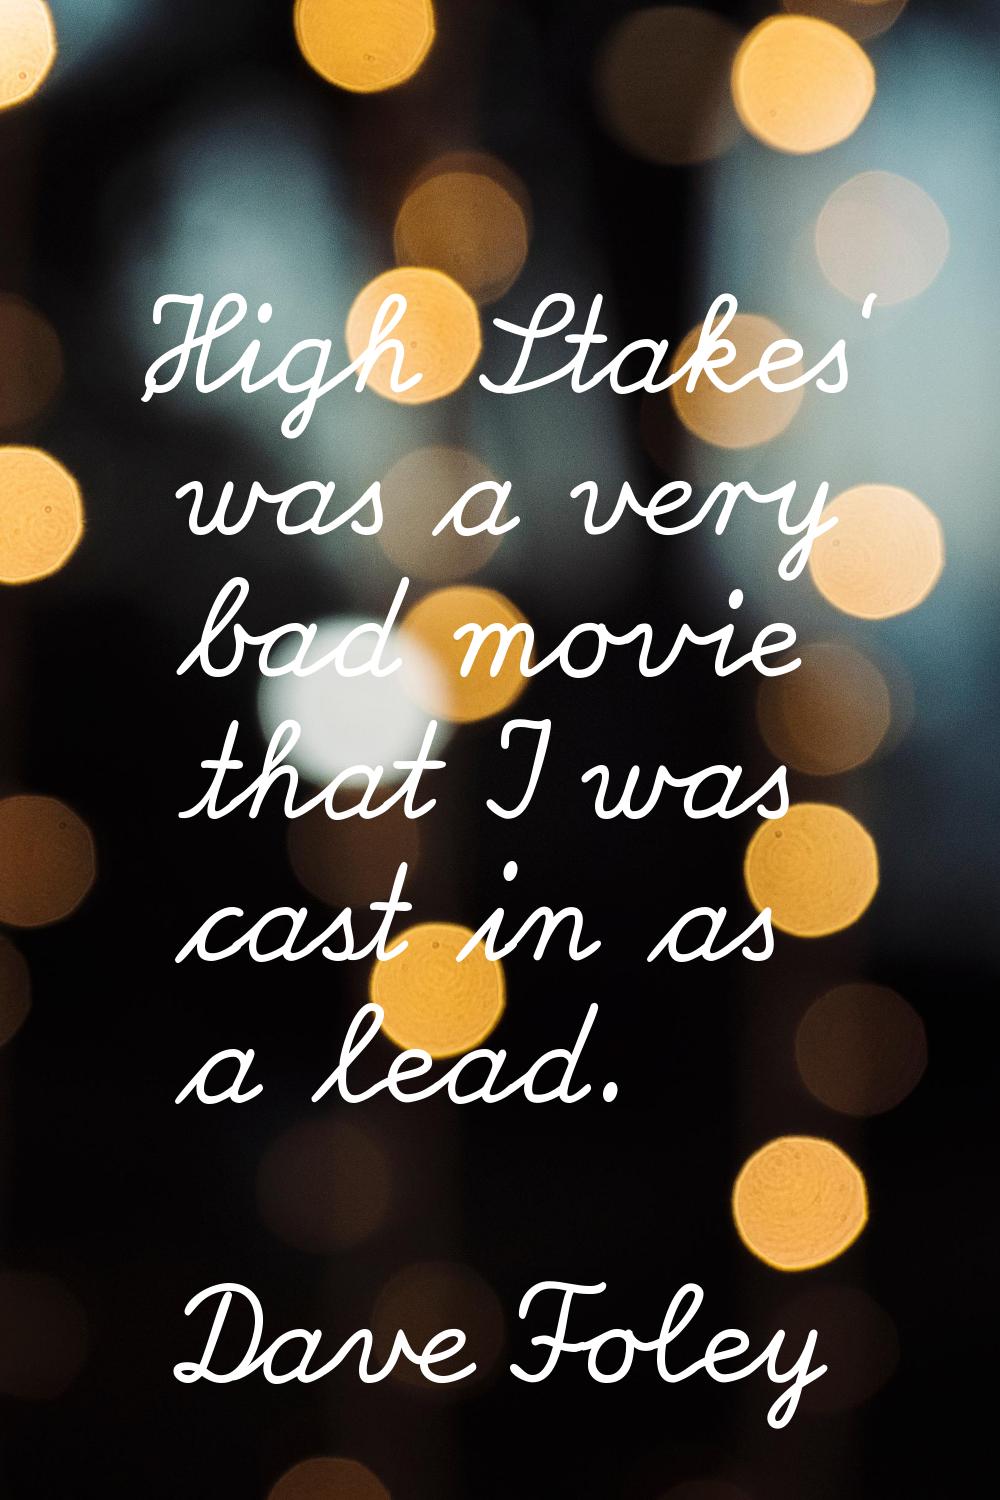 'High Stakes' was a very bad movie that I was cast in as a lead.